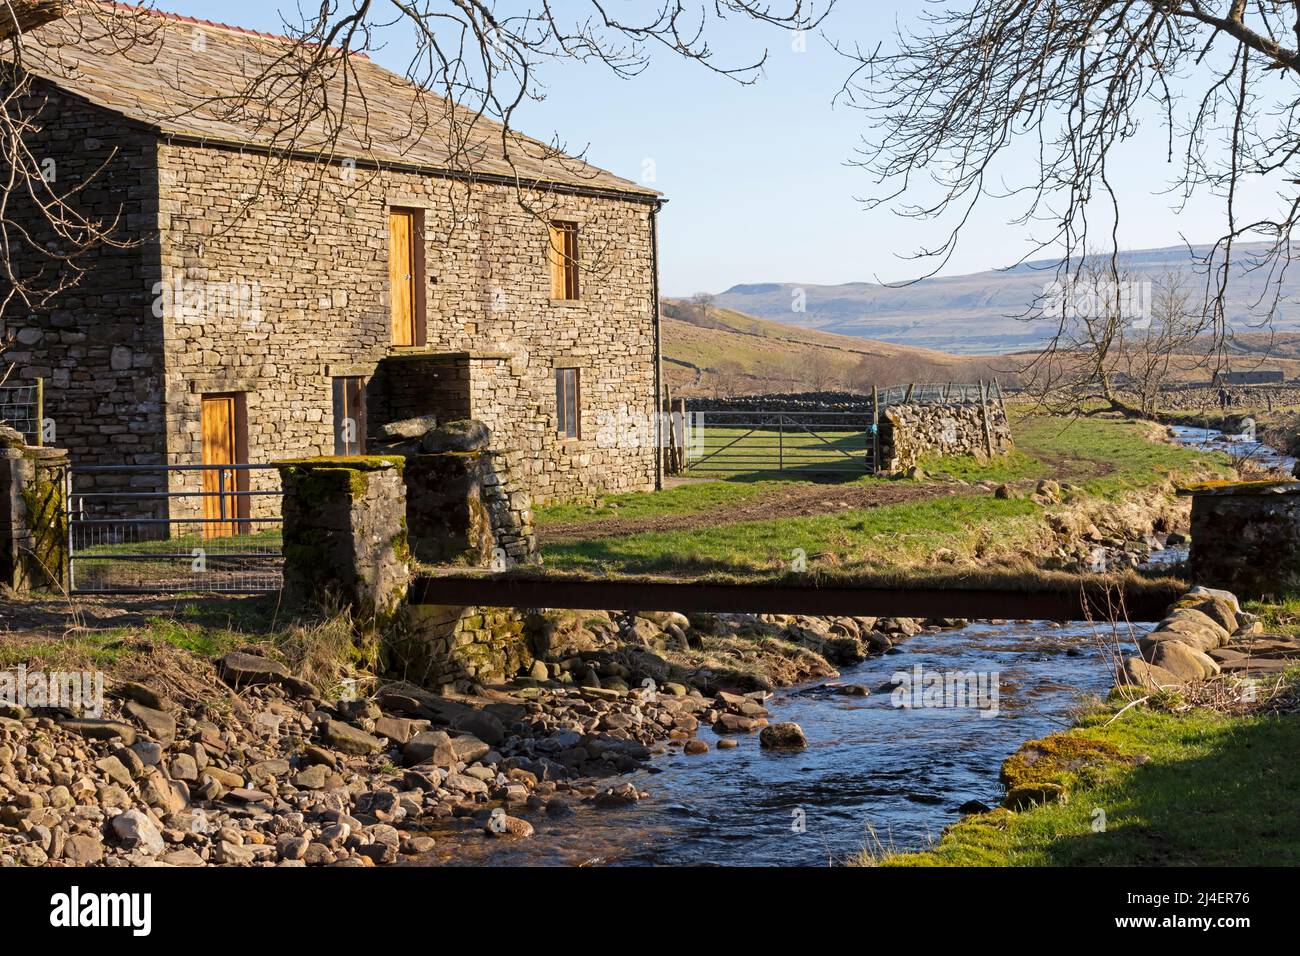 A stone house in Cotterdale, Yorkshire Dales National Park with a narrow bridge over Cotterdale Beck, which eventually flows into the River Ure. Iconi Stock Photo